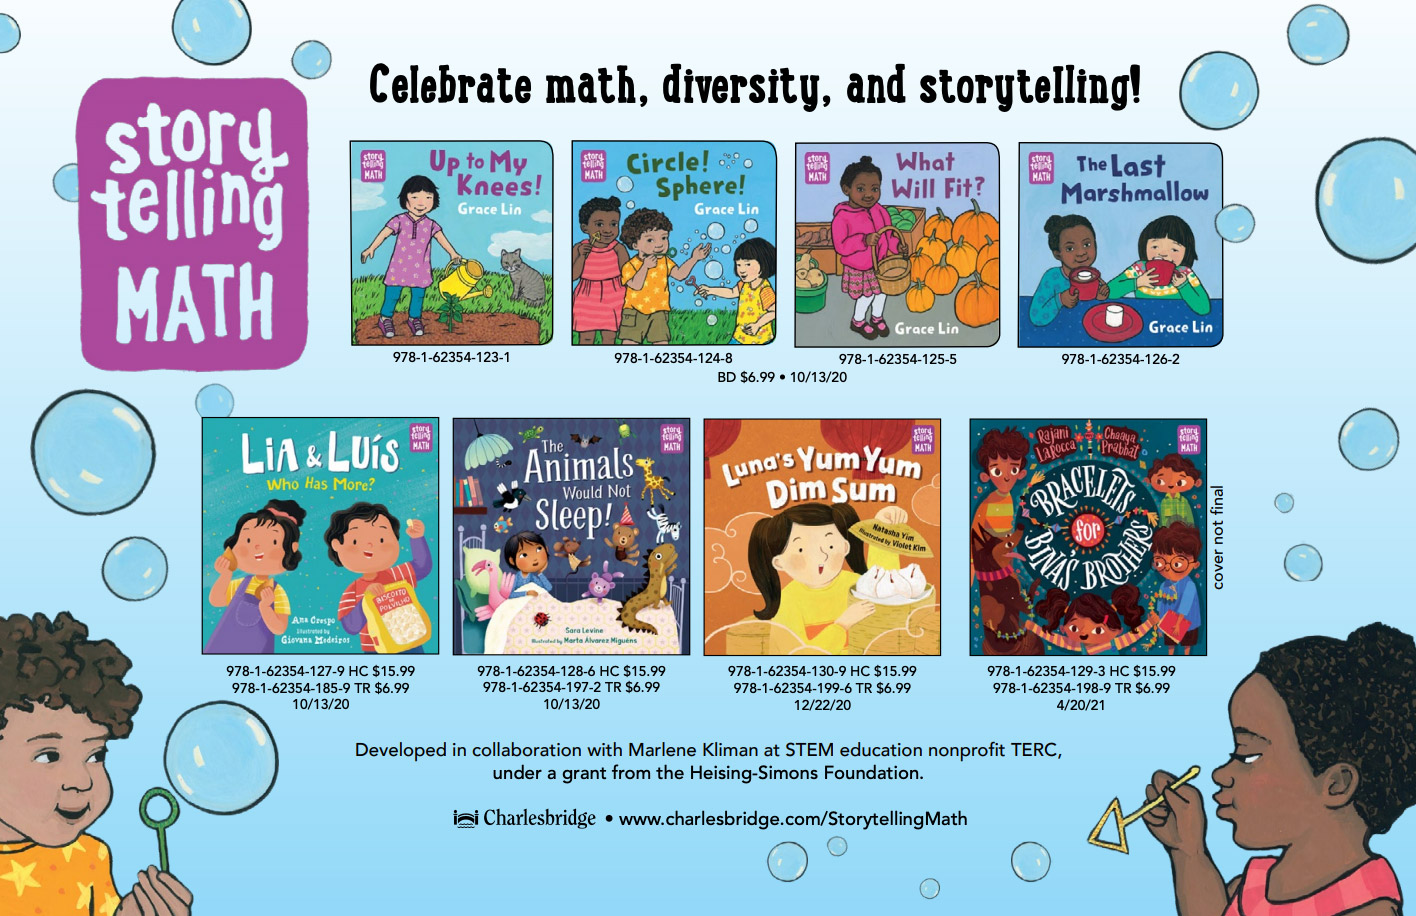 New Storytelling Math Books Available Starting Today!